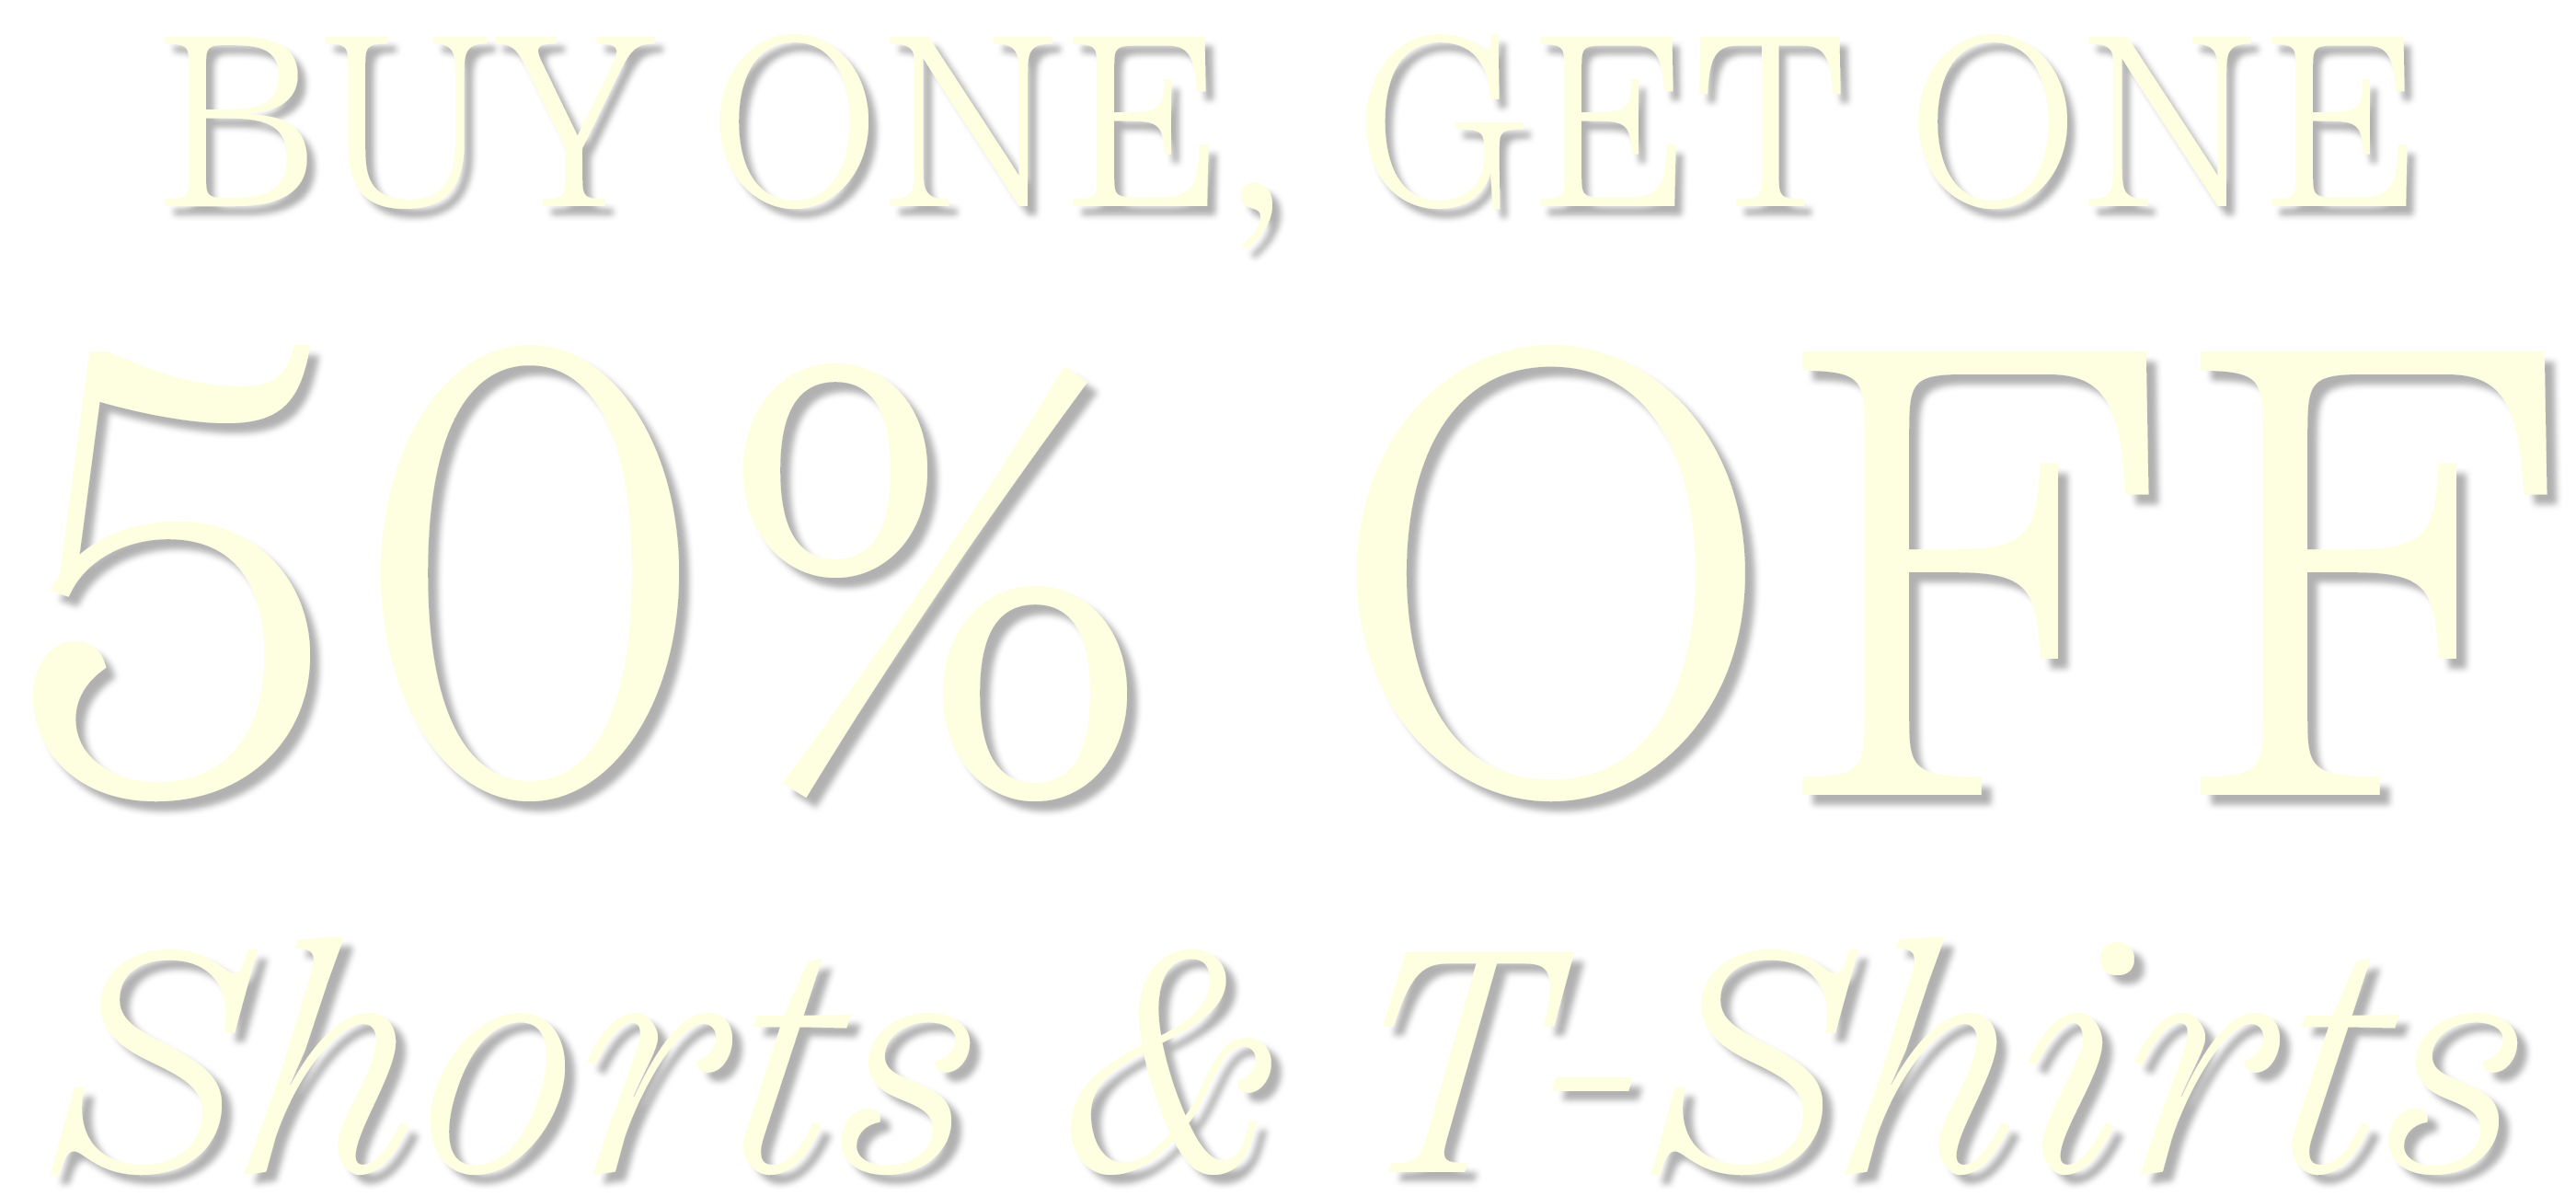 Buy One Get One Half Price Shorts & T-Shirts.